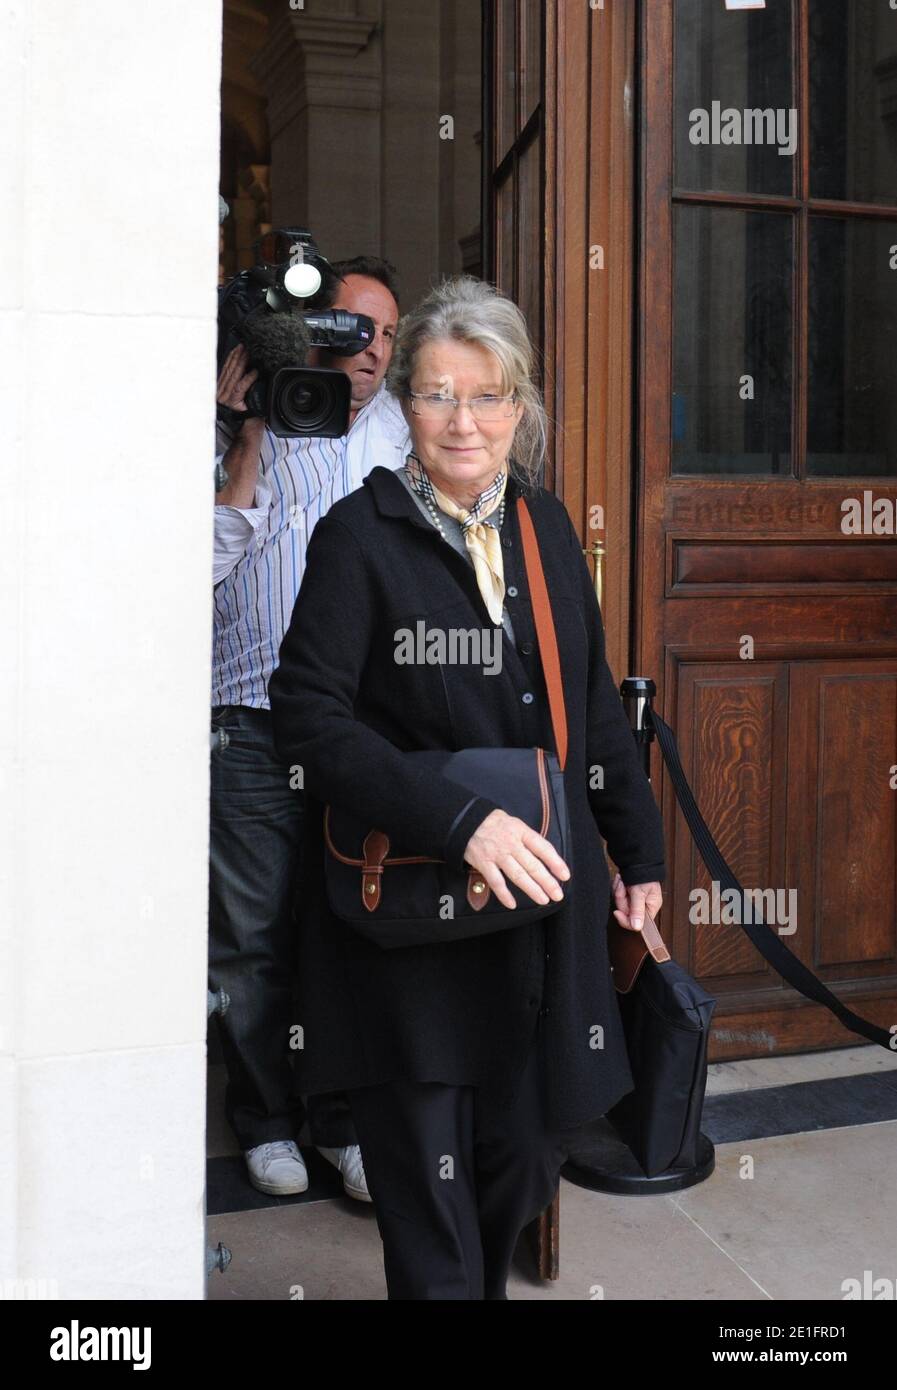 Danielle Gonnin, the mother of Kalinka Bamberski, leaves the Palais de Justice after attending the first session of German cardiologist Dieter Krombach's trial for the murder of Kalinka Bamberski, in Paris, France on March 29, 2011. The German doctor is accused of having raped and killed his then 14-year-old stepdaughter, Kalinka Bamberski, in the summer of 1982 while she was holidaying with her mother at Krombach's home at Lake Constance, southern Germany. A court in Germany ruled that Krombach could not be held responsible for the death, but in 1995 a court in Paris found the doctor guilty o Stock Photo